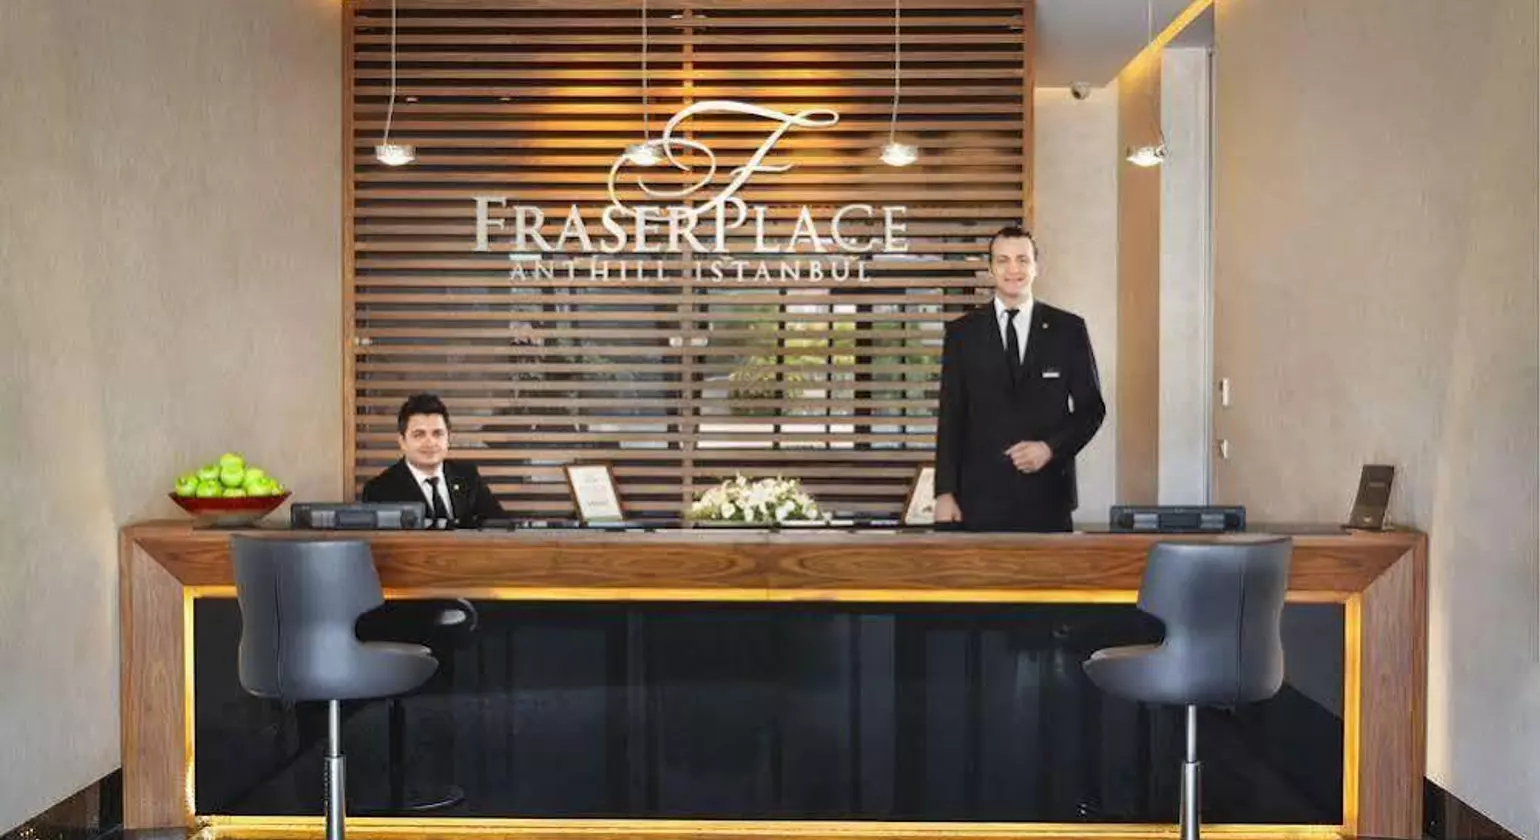 Fraser Place Anthill Istanbul